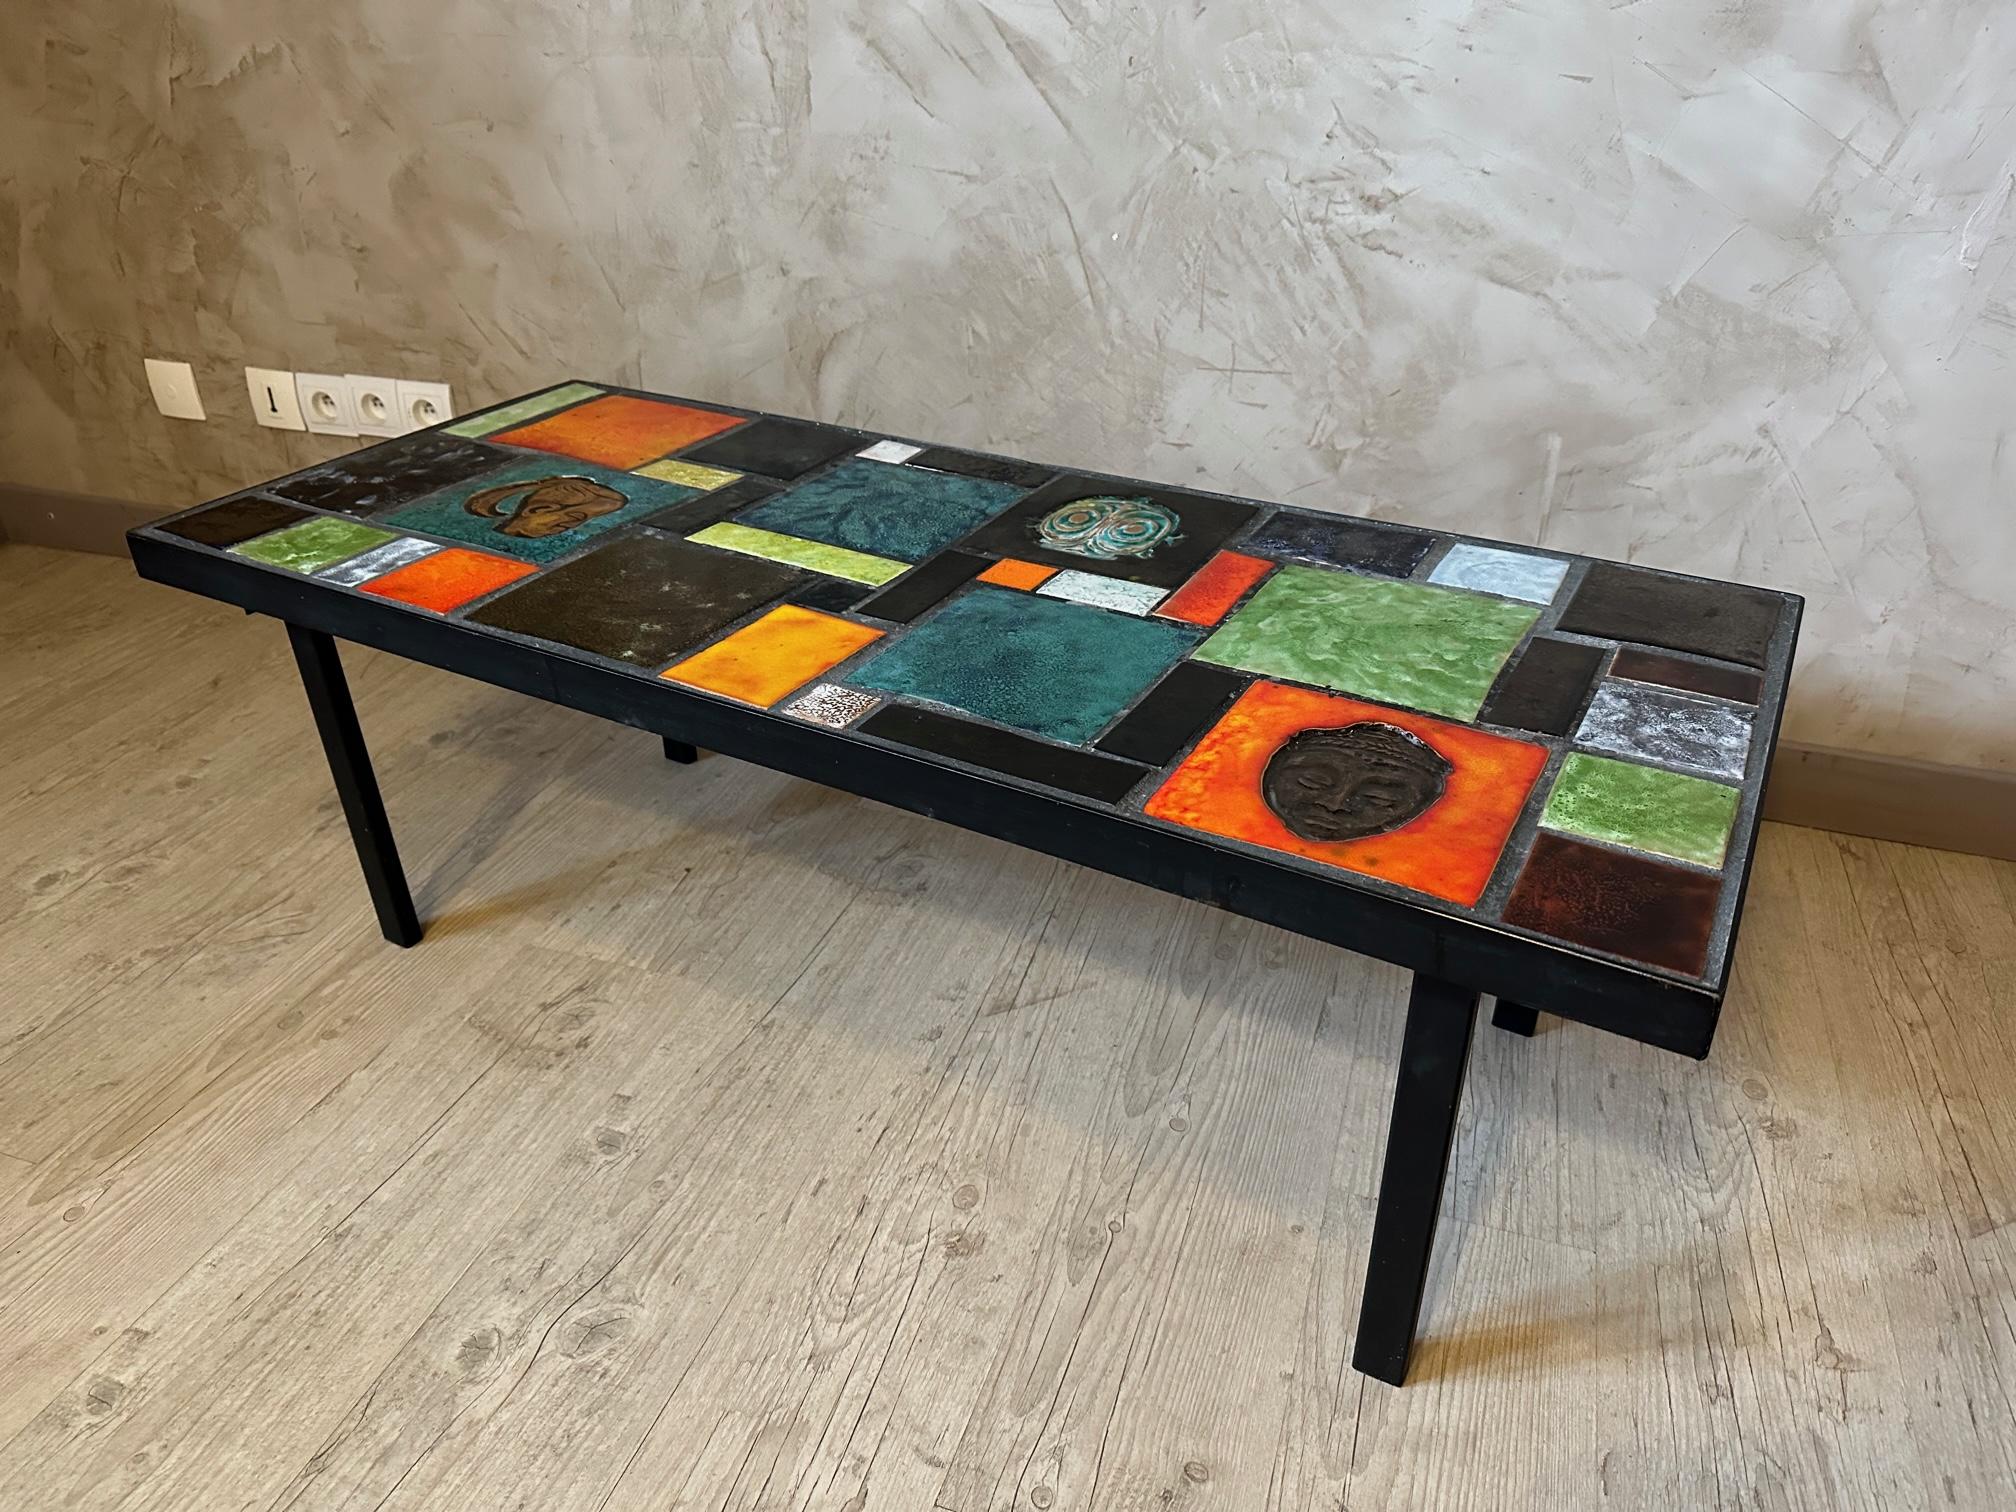 Very beautiful coffee table from the 60s in ceramic tiles and black metal base.
Very colorful ceramic tiles, three of them represent African heads or masks.
Very good state. For lovers of mid-century design and furniture.